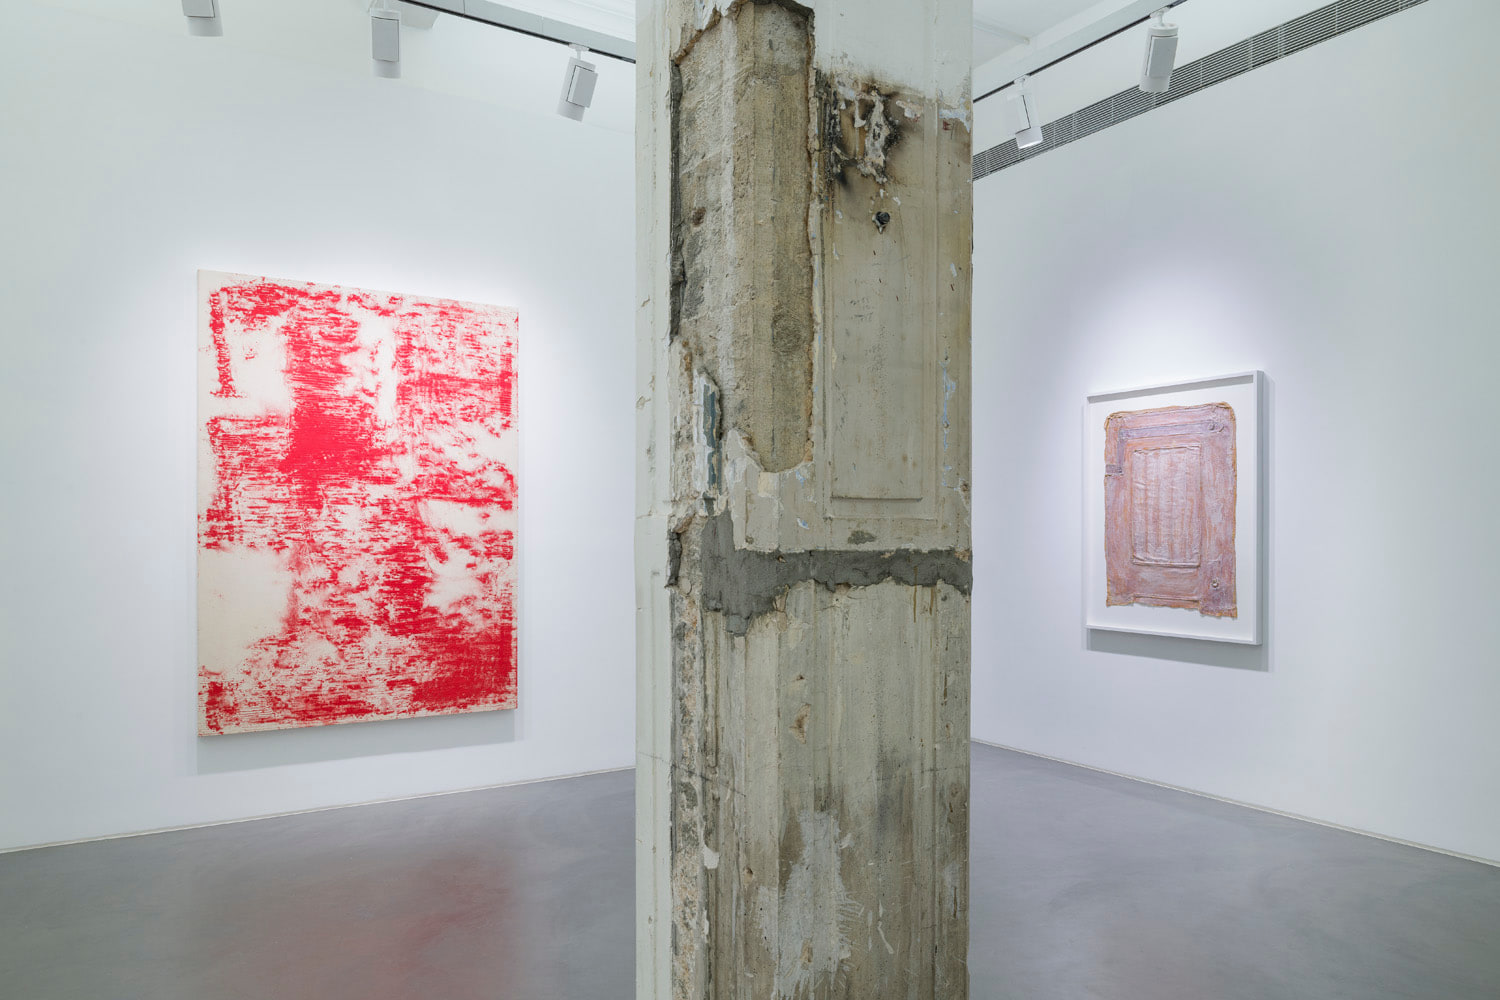 Fifth installation view of the group exhibition be/longing at Lehmann Maupin Hong Kong